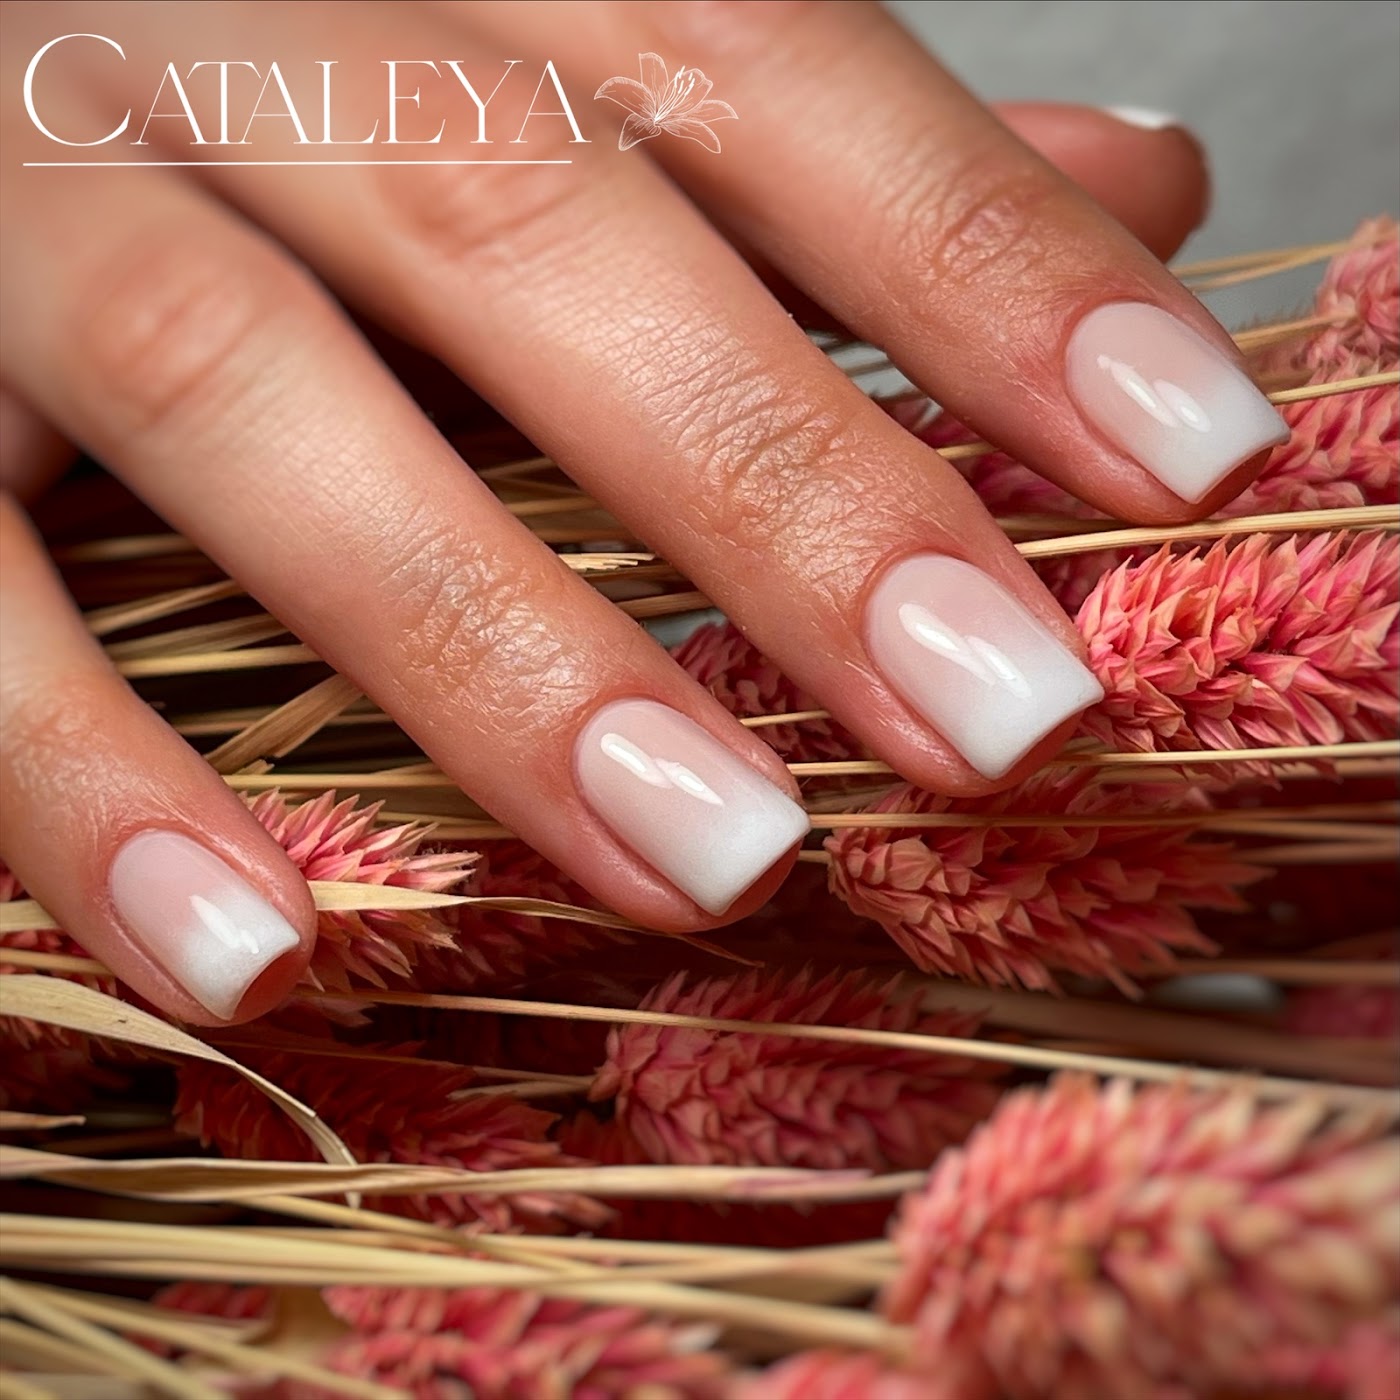 Nails by Cataleya